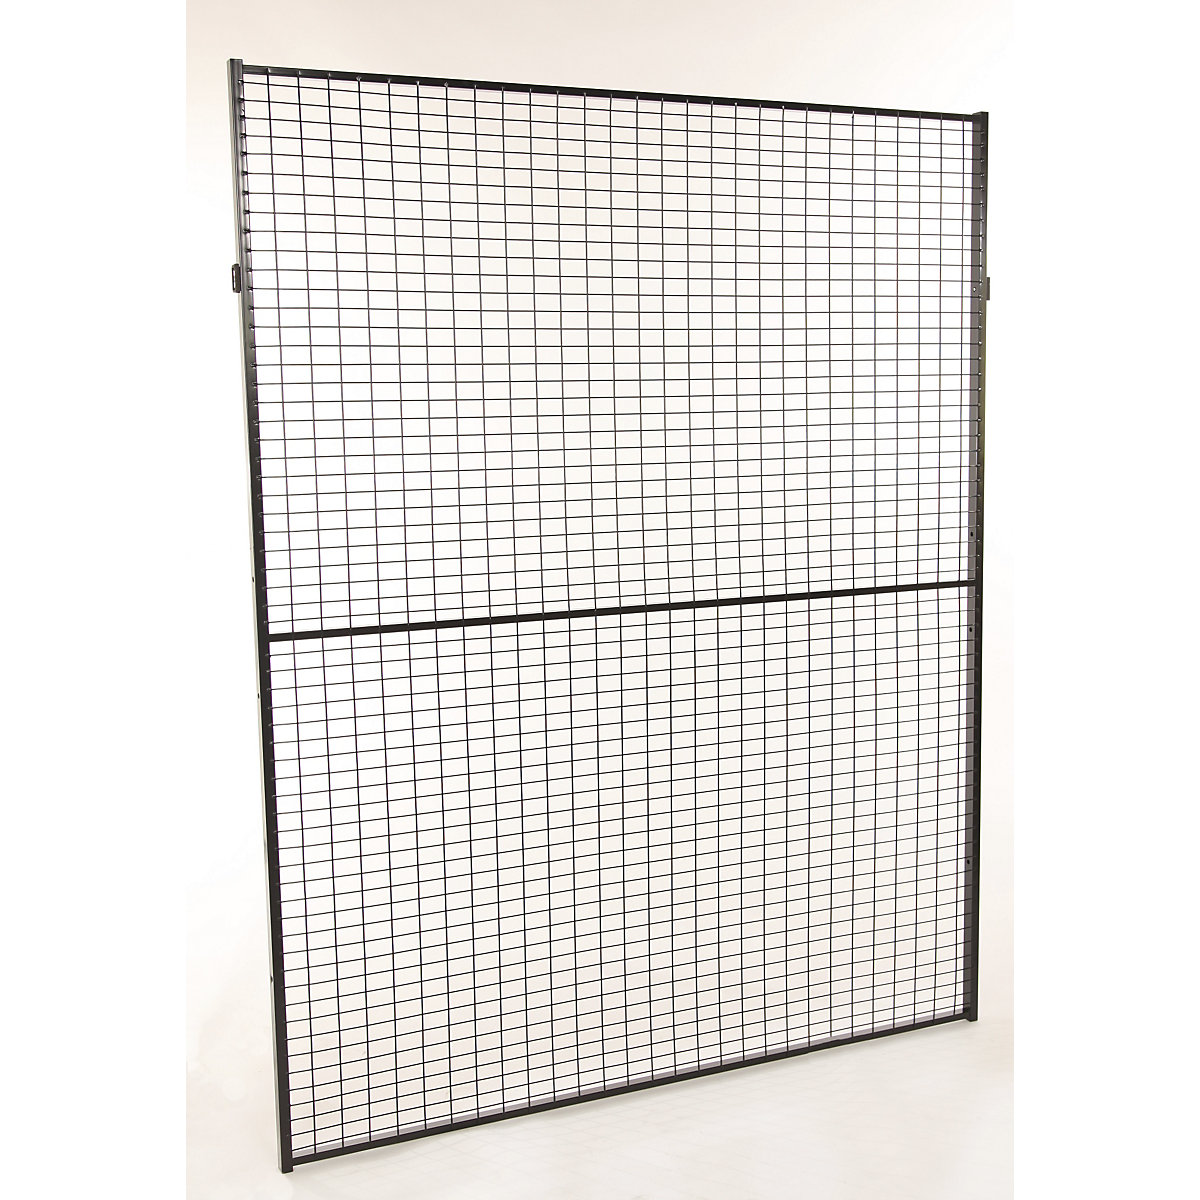 Axelent – X-GUARD CLASSIC machine protective fencing, wall section, height 1900 mm, width 1500 mm